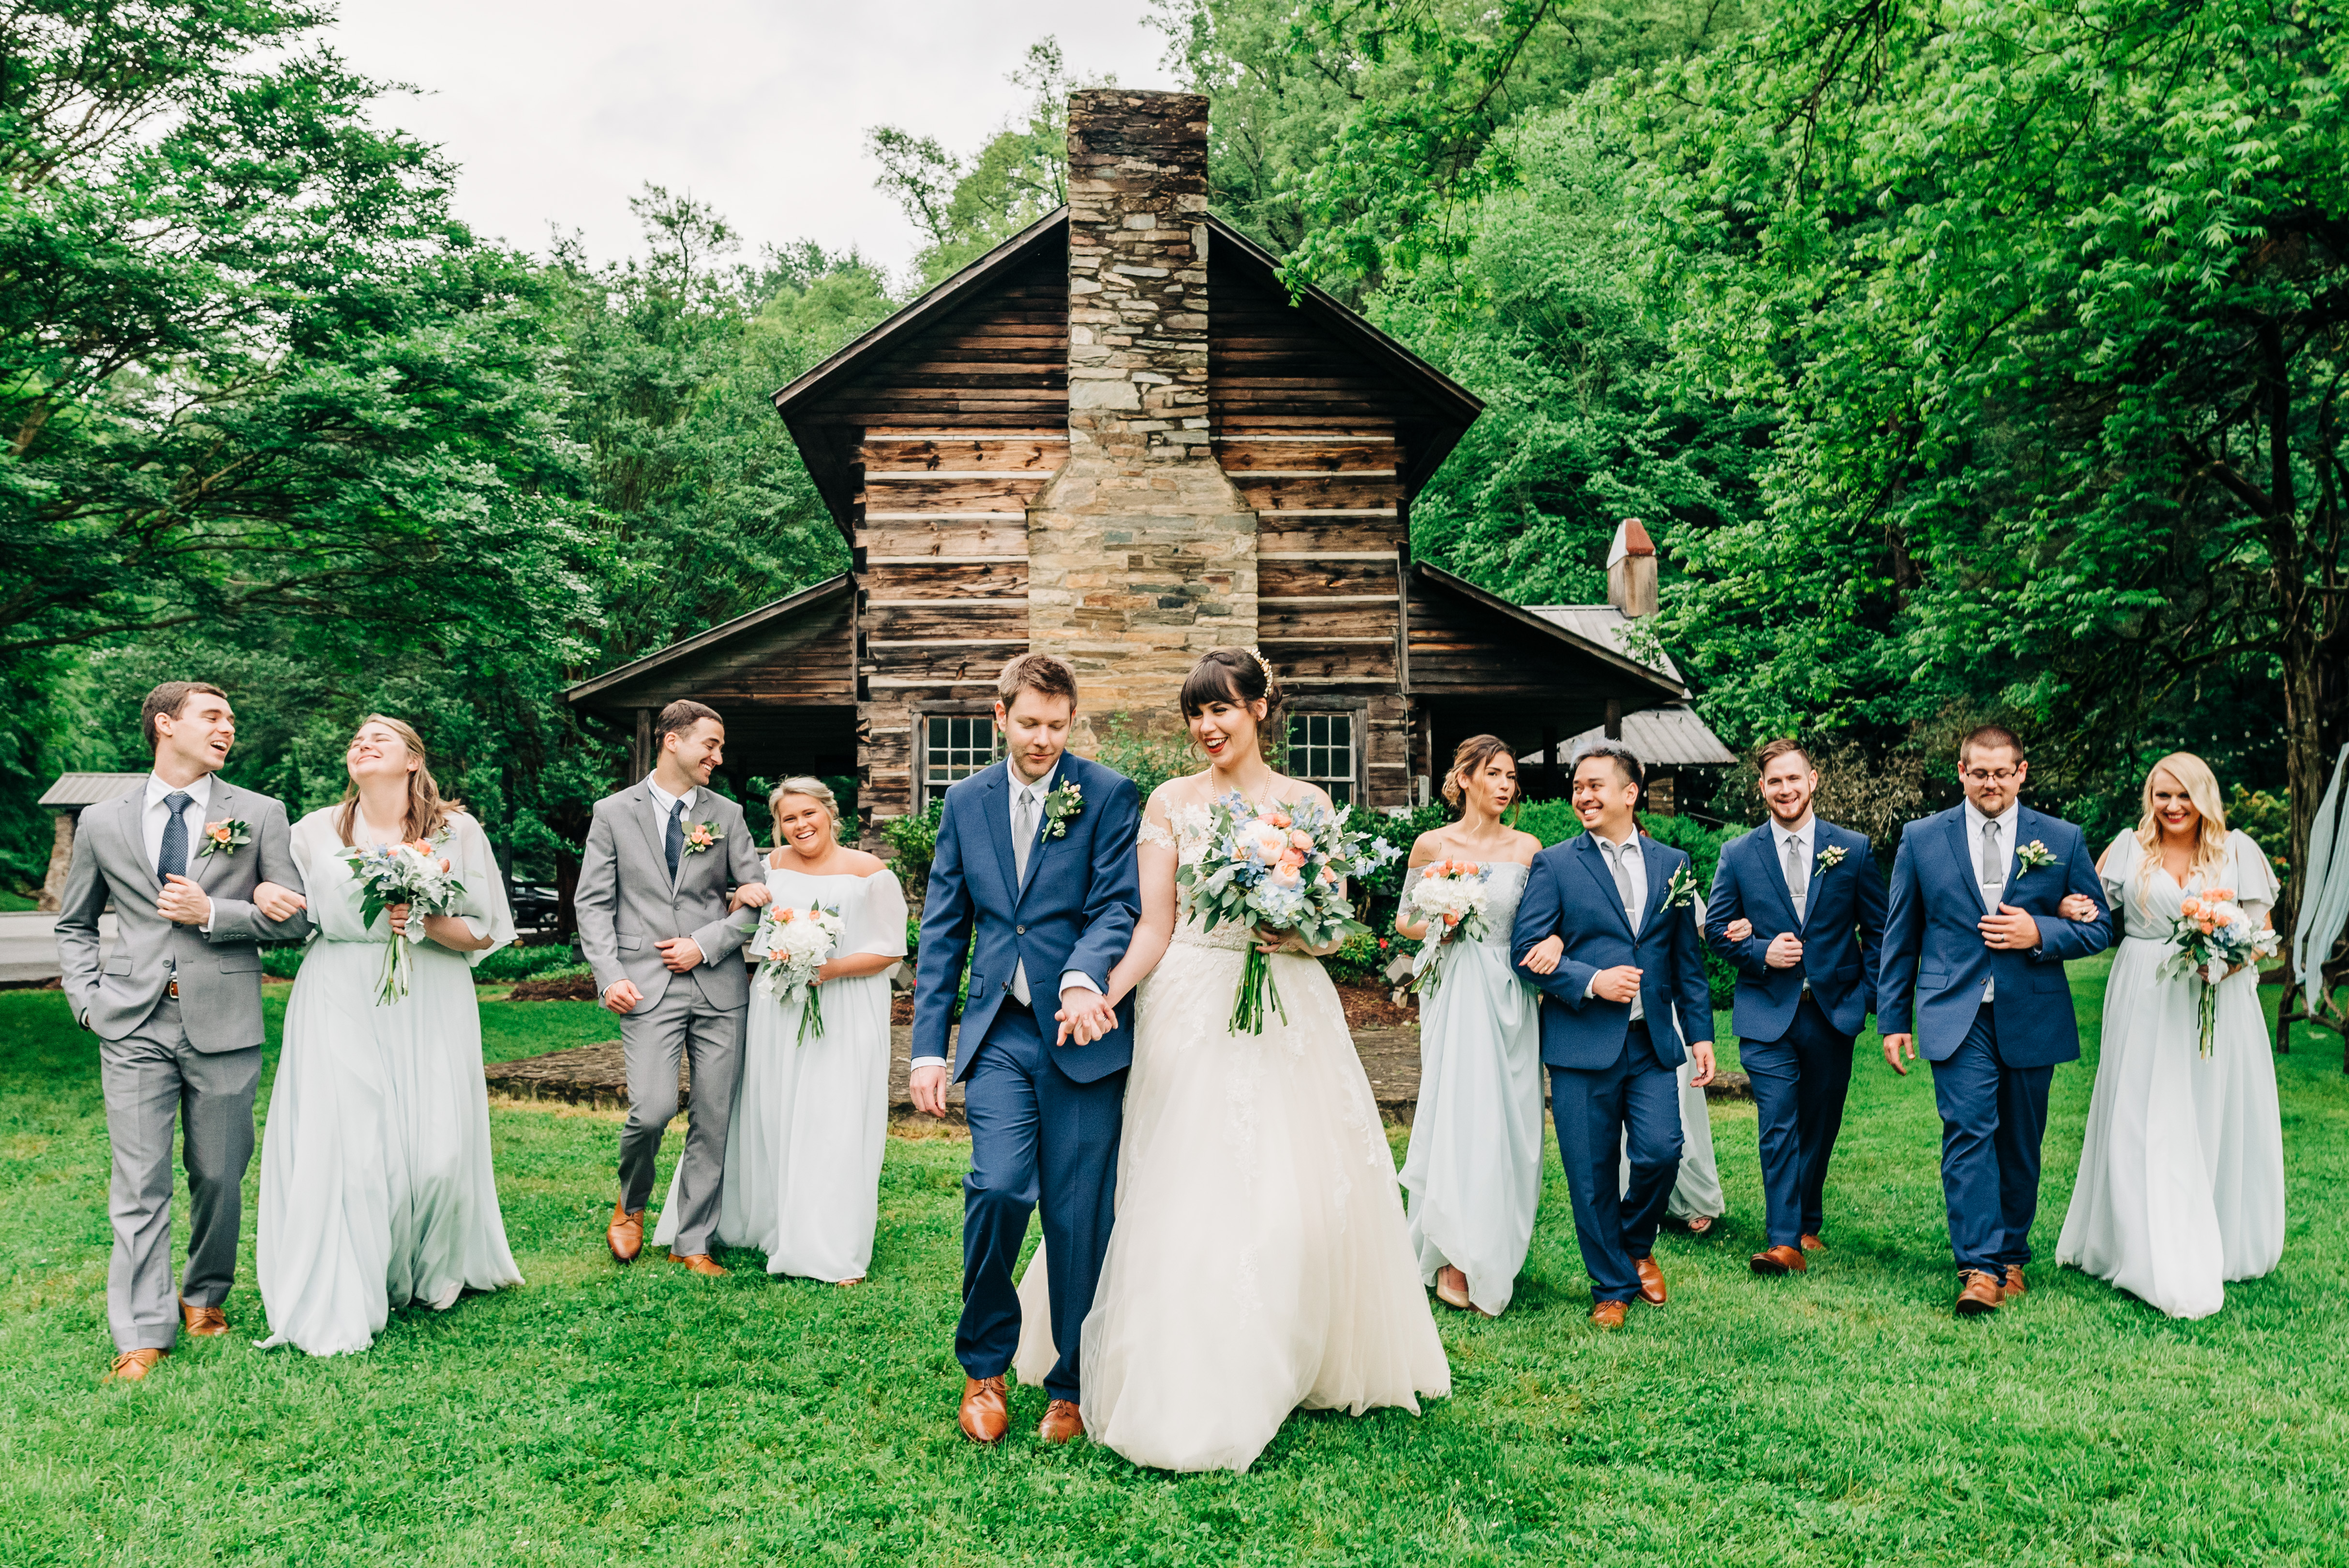 https://delinephotography.com/wp-content/uploads/2019/05/High-Country-Wedding-44-of-89.jpg